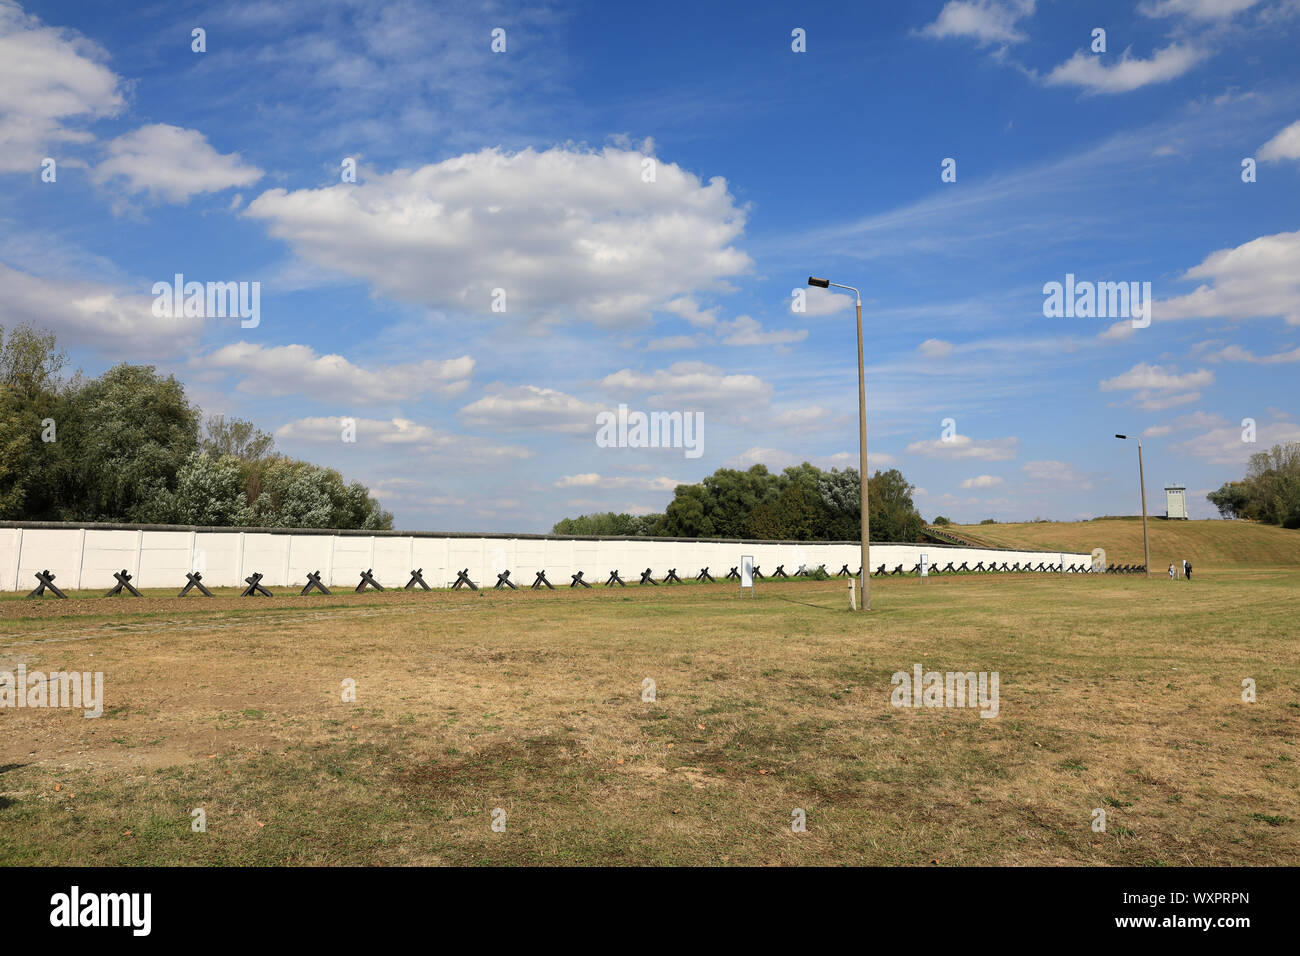 05 September 2019, Saxony-Anhalt, Hötensleben: The command tower and remains of the Wall are located at the border monument in Hötensleben on the former inner-German border. Photo: Peter Gercke/dpa-Zentralbild/ZB Stock Photo